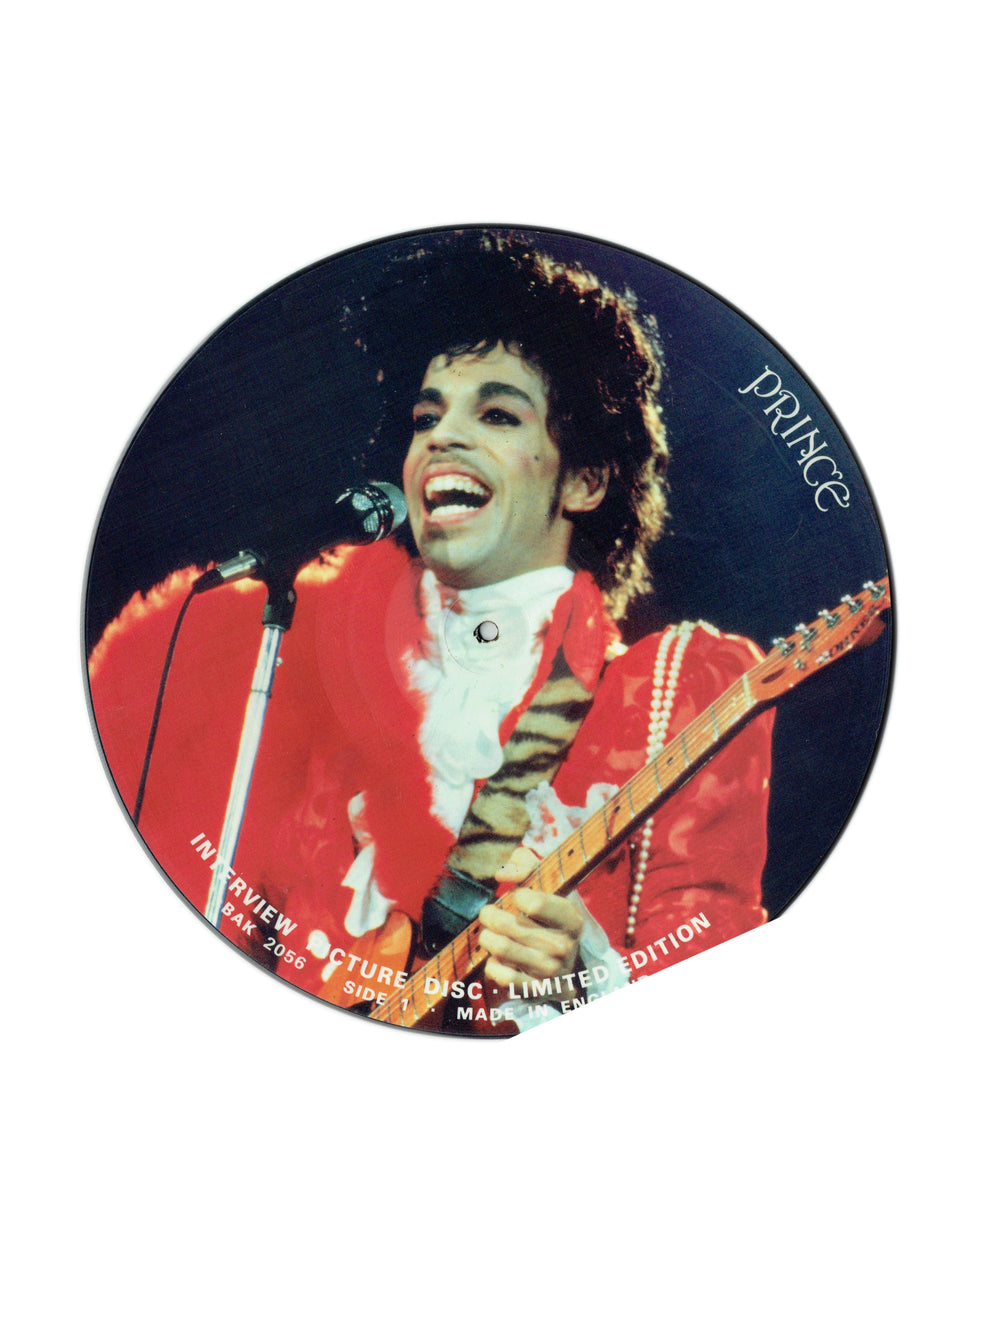 Prince – Limited Edition Interview Picture Disc Vinyl 12" Picture Disc Preloved: UK